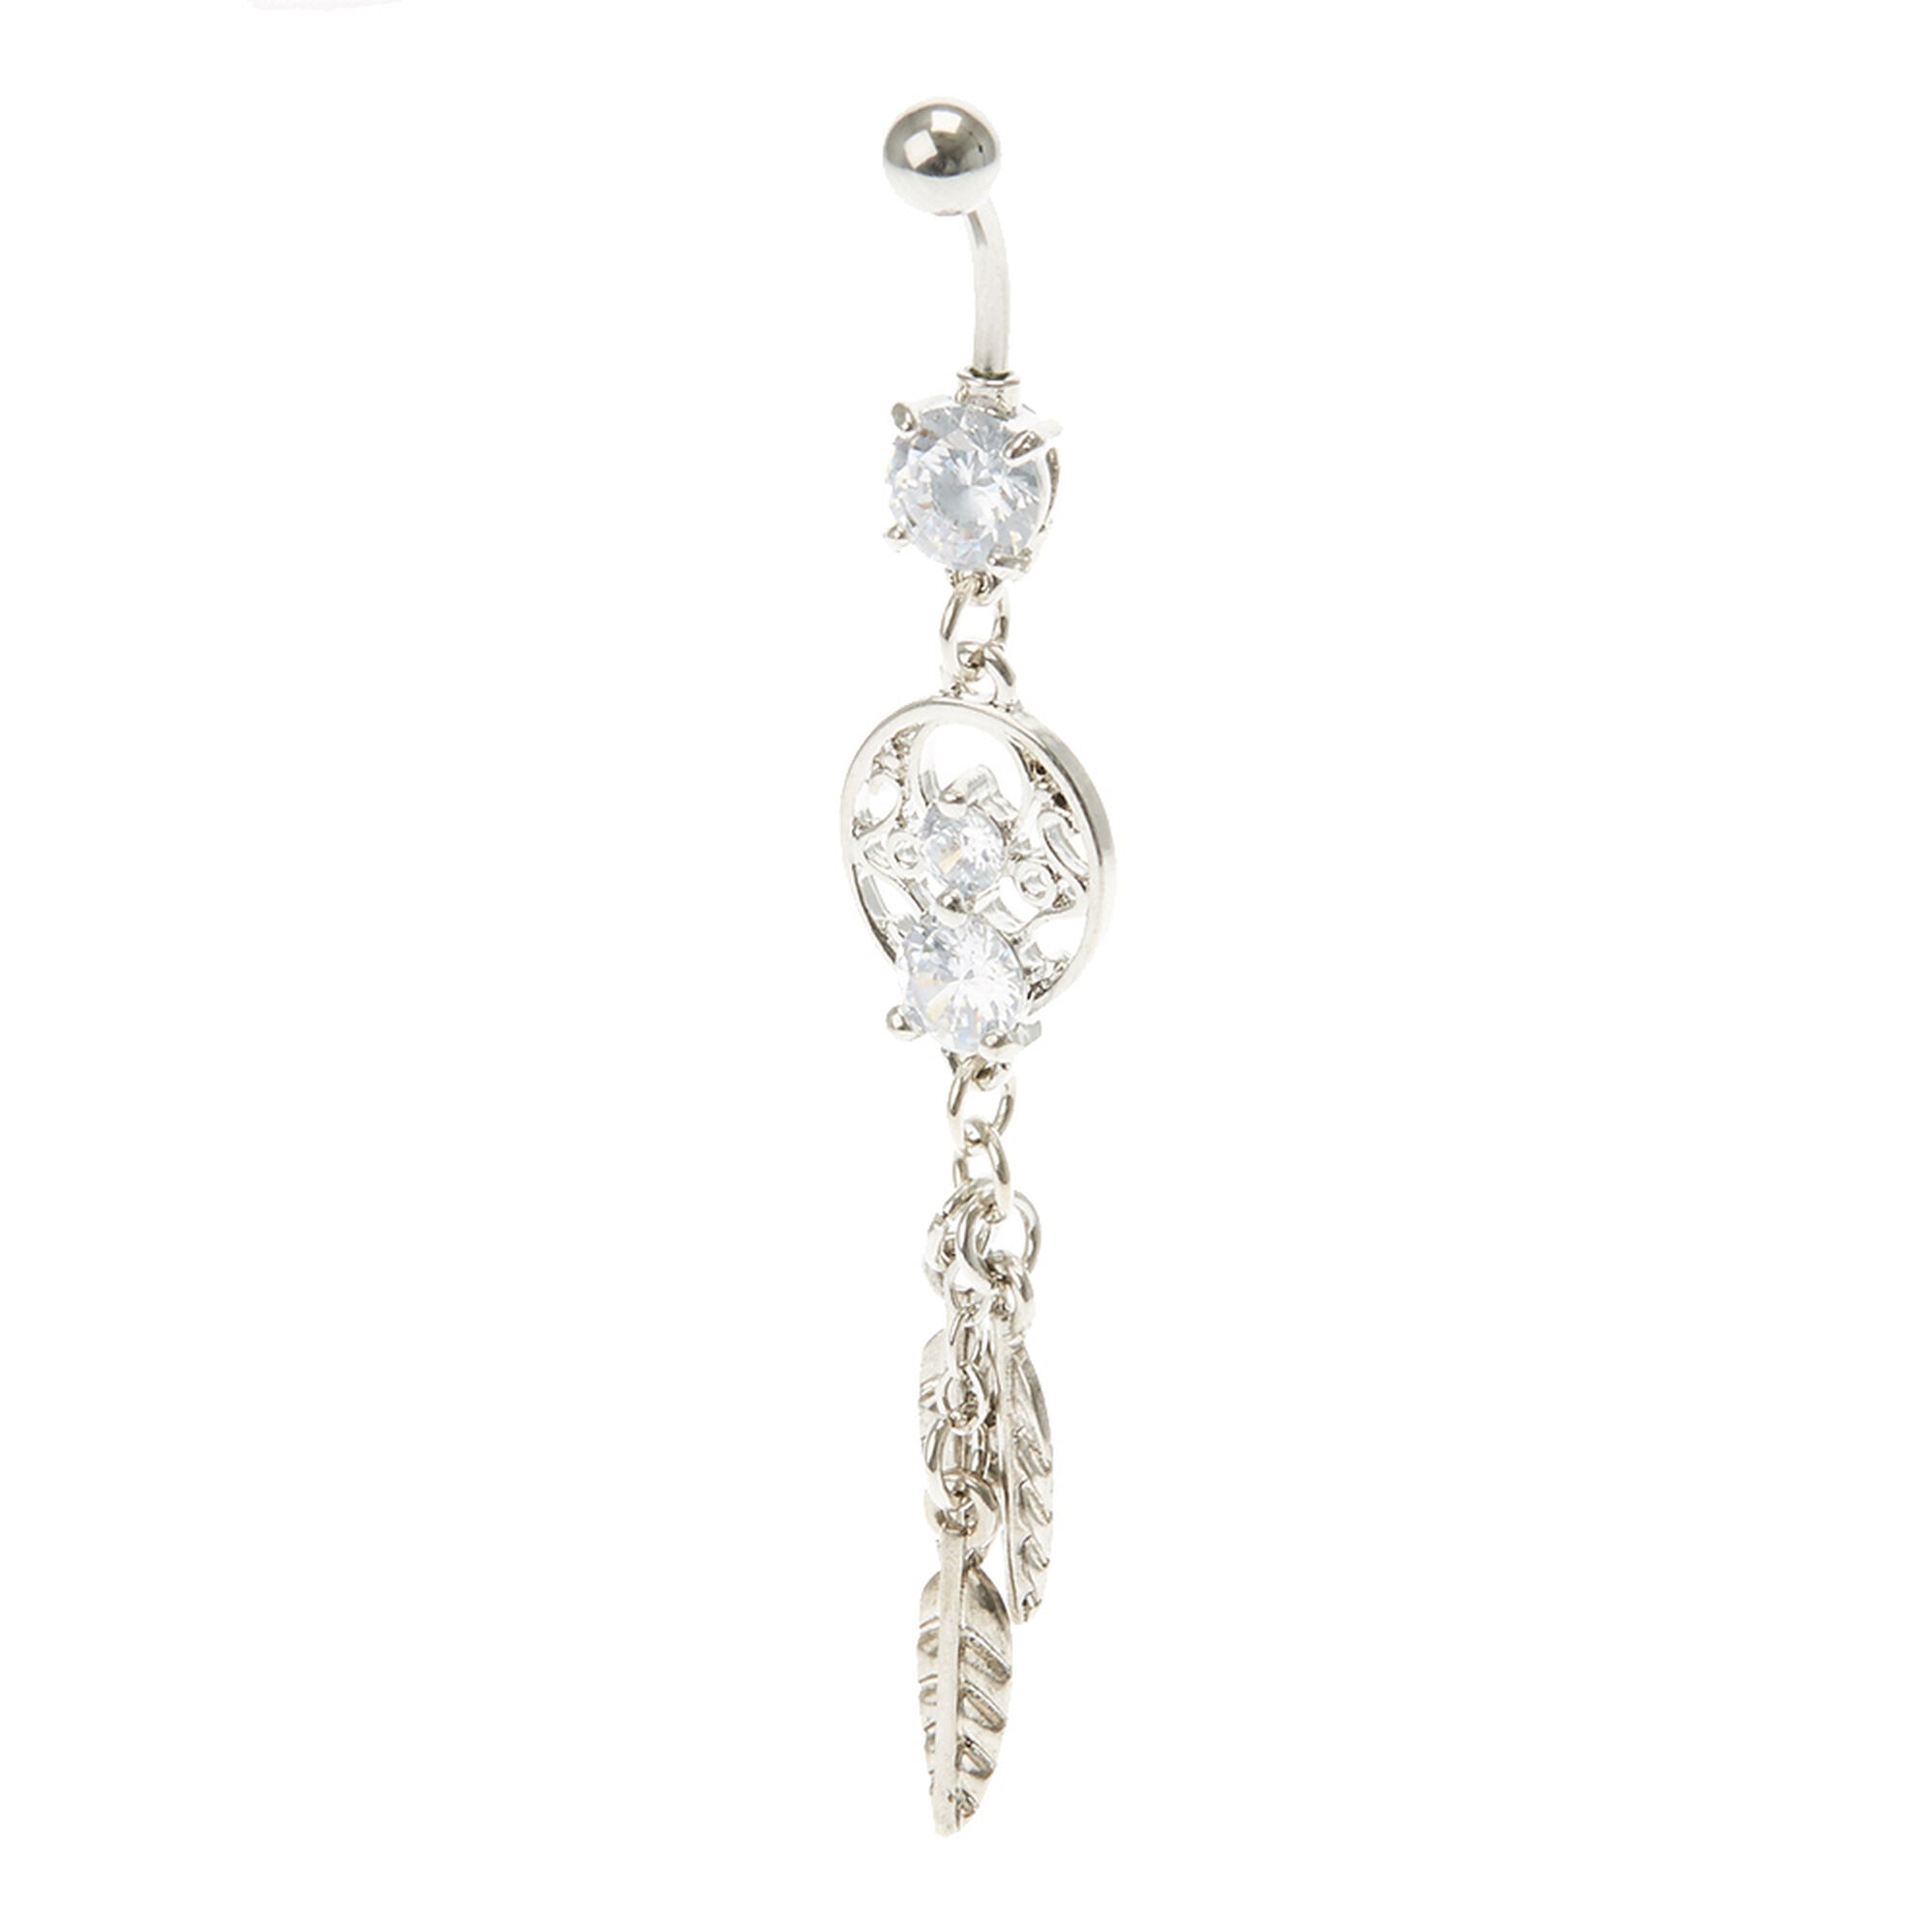 View Claires 14G Cubic Zirconia Tone Dreamcatcher Belly Ring Silver information